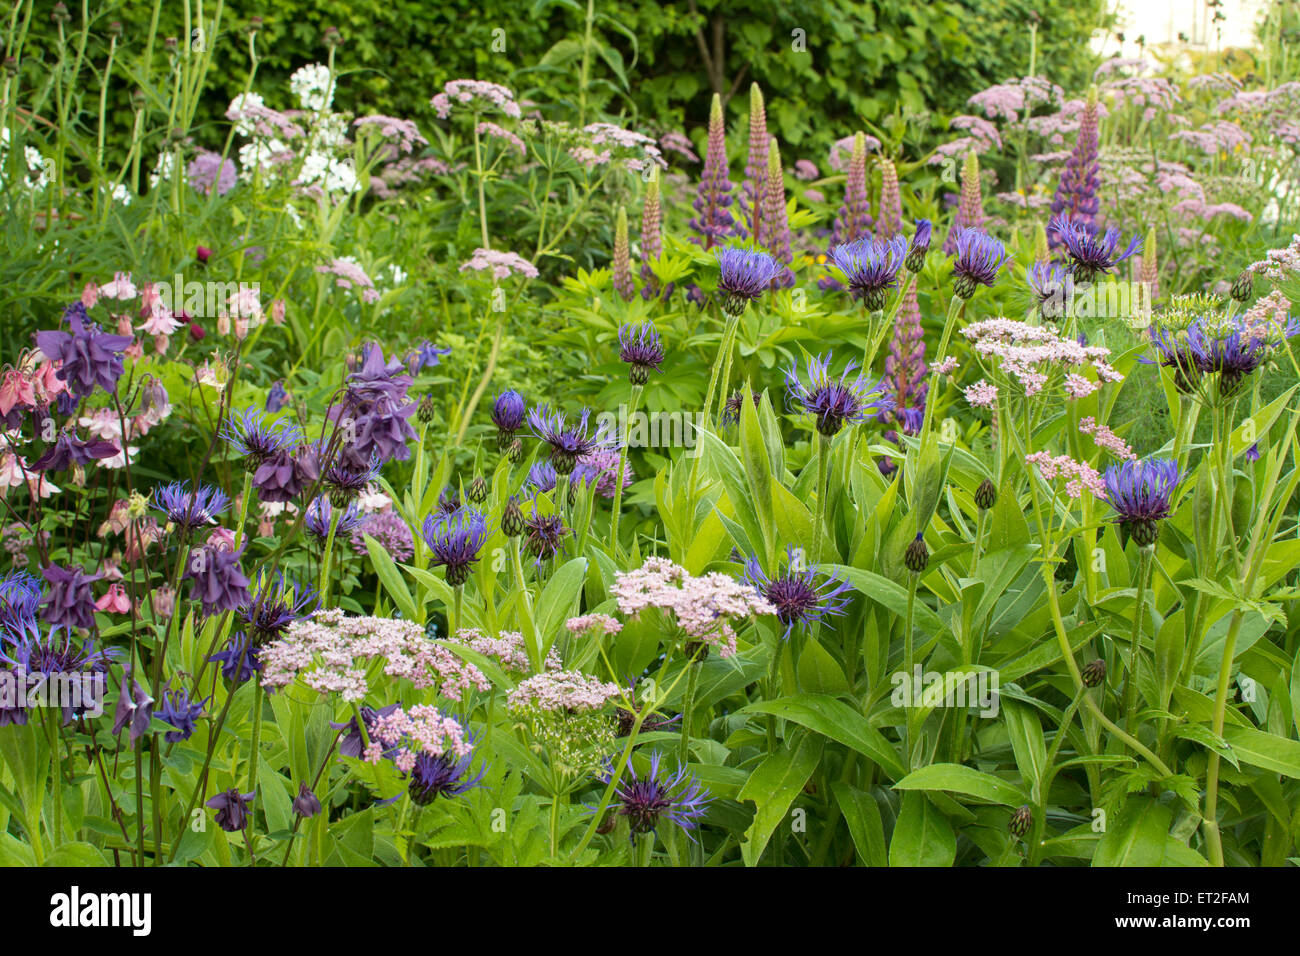 early summer garden border in cool shades of blue, purple, pink and white - Scotland, UK Stock Photo